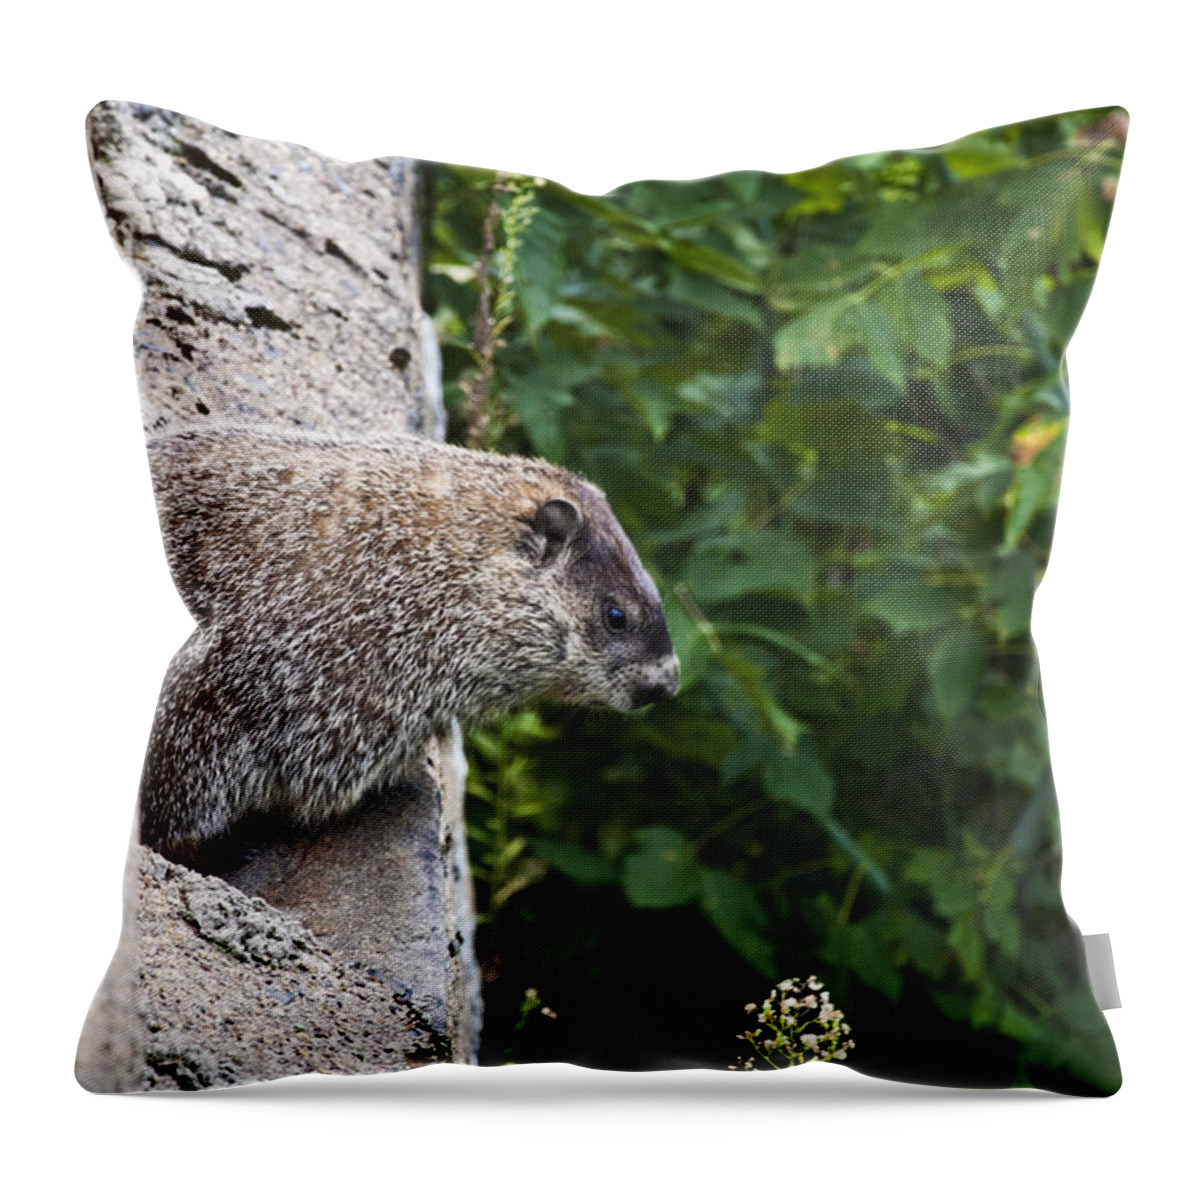 Punxatawny Phil Throw Pillow featuring the photograph Groundhog Day by Bill Cannon